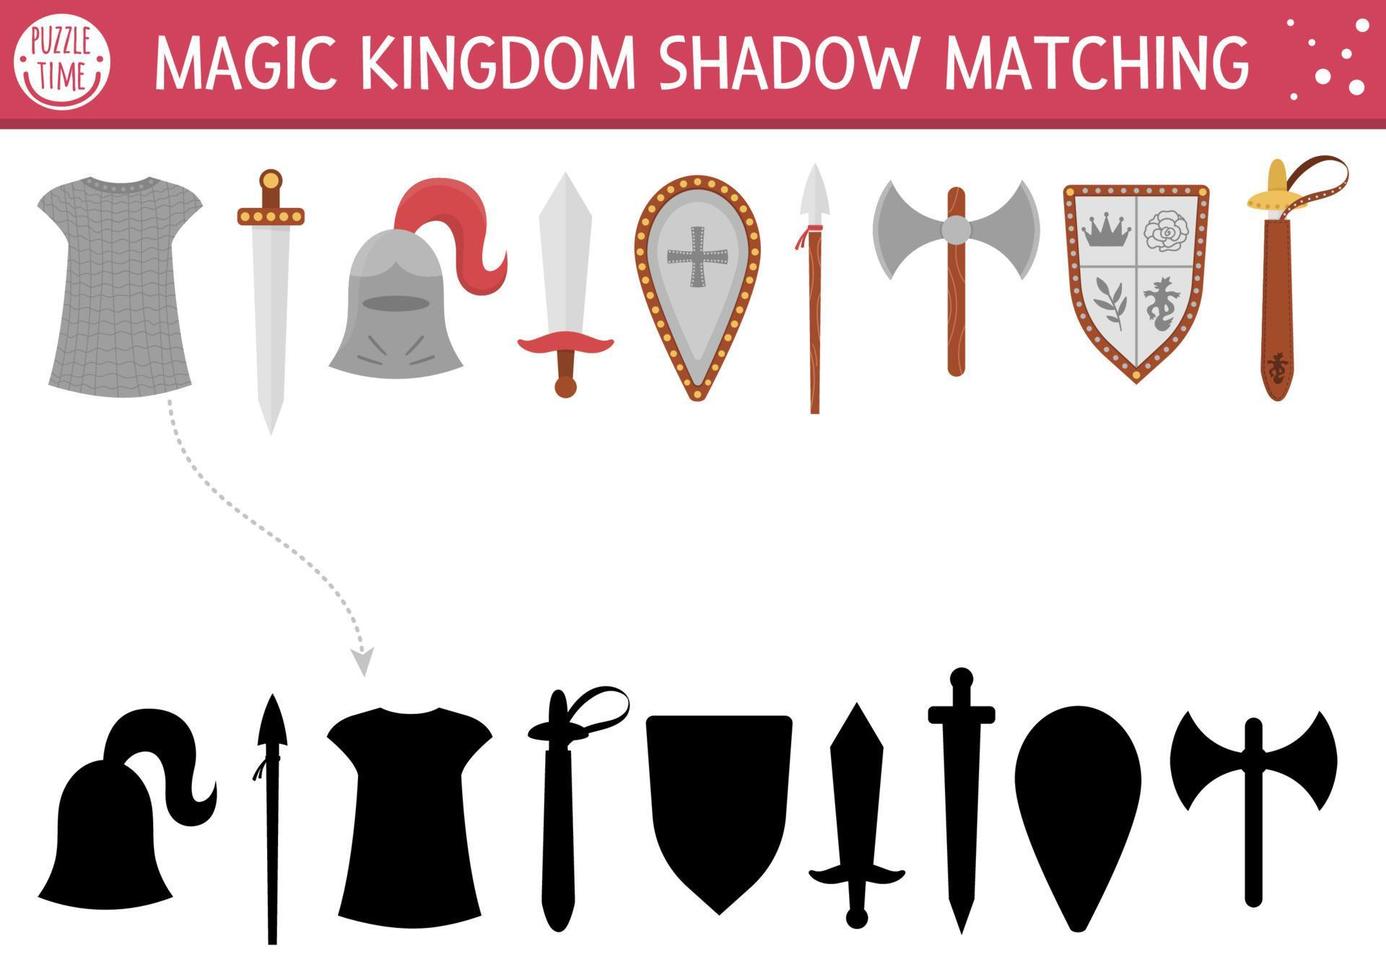 Fairytale shadow matching activity with sward, shield, helmet. Magic kingdom puzzle with traditional knight armor. Find correct silhouette printable worksheet or game. Fairy tale page for kids vector